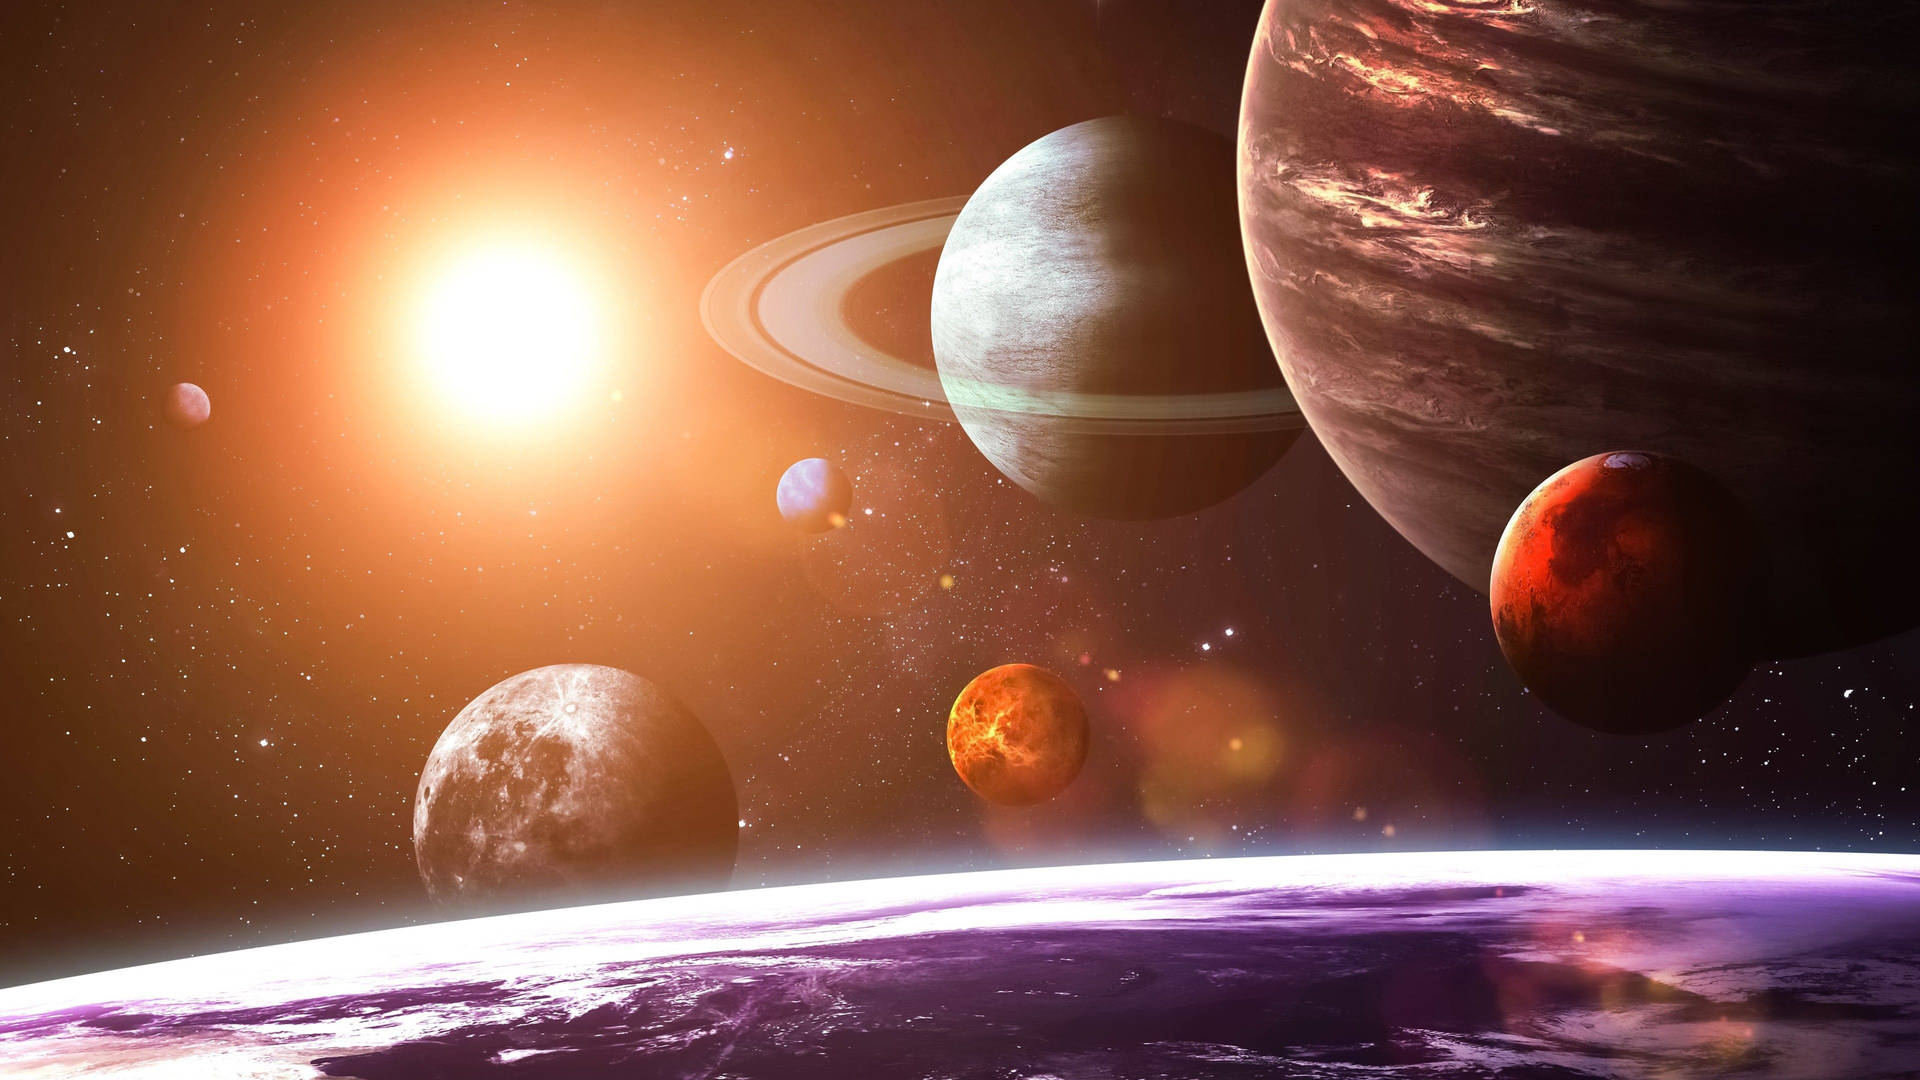 Solar System Space Art Background